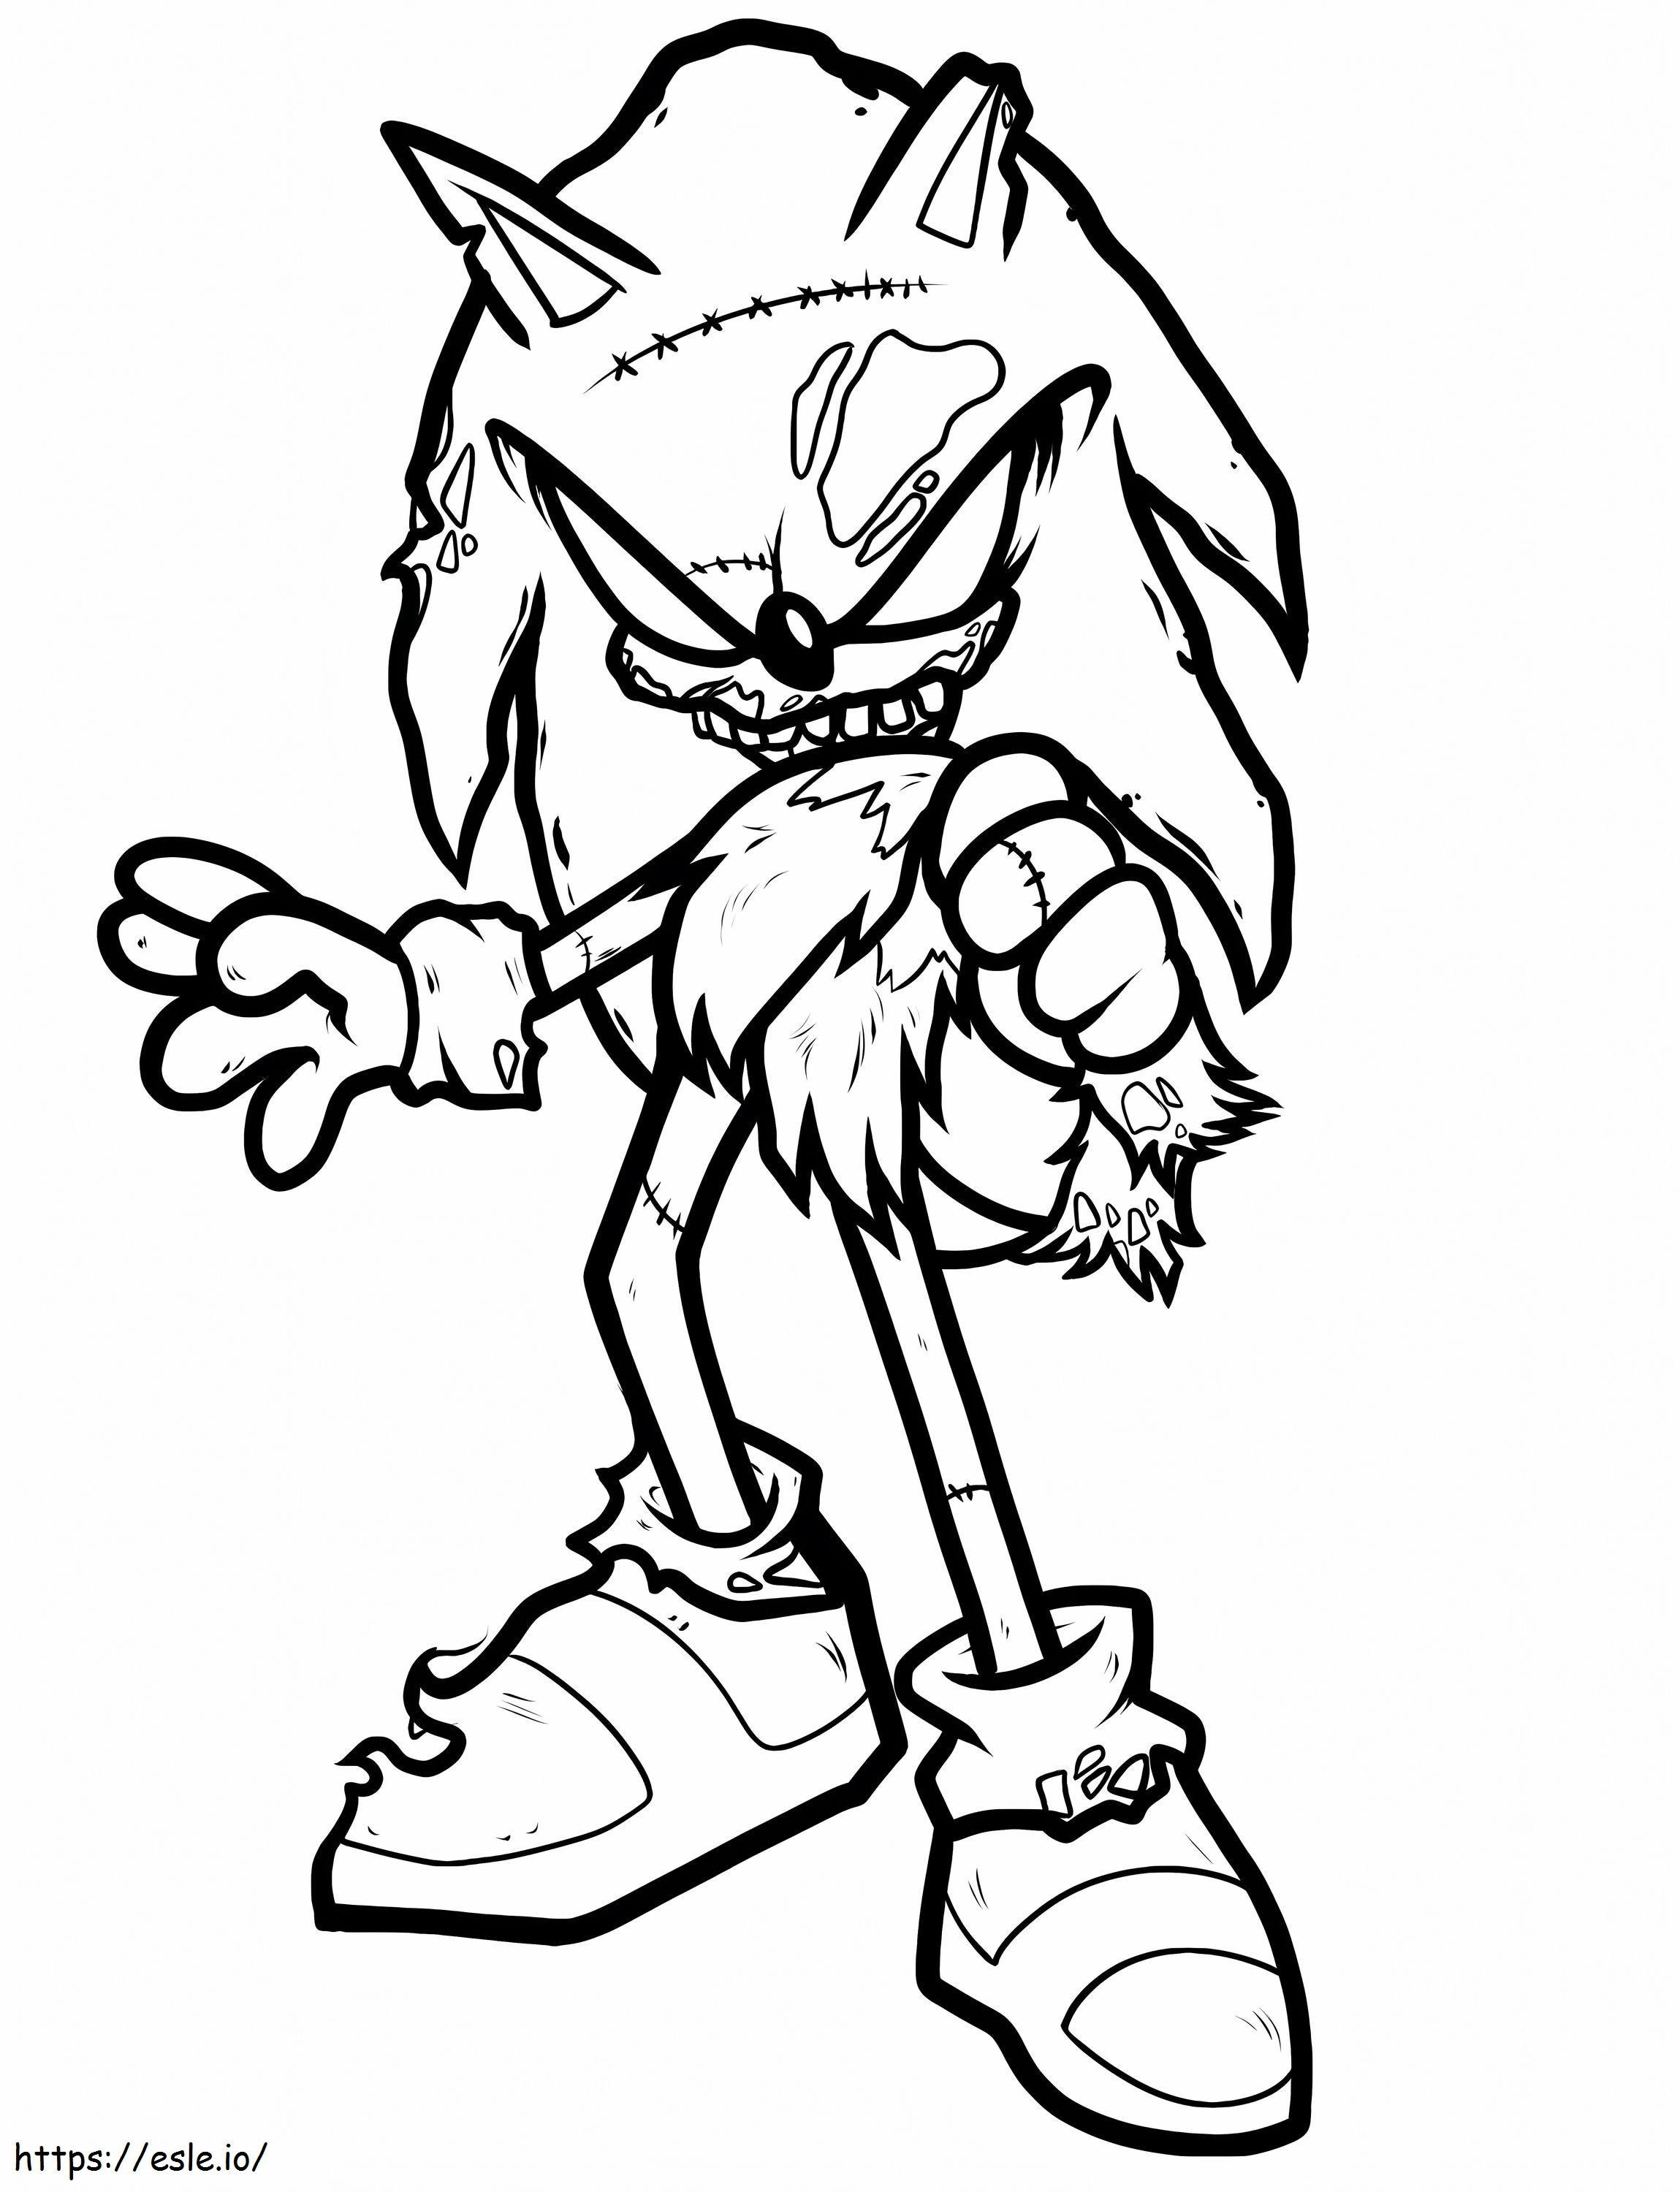 How To Draw Zombie Sonic Zombie Sonic The Hedgehog Step 8 1 000000072209 5 coloring page